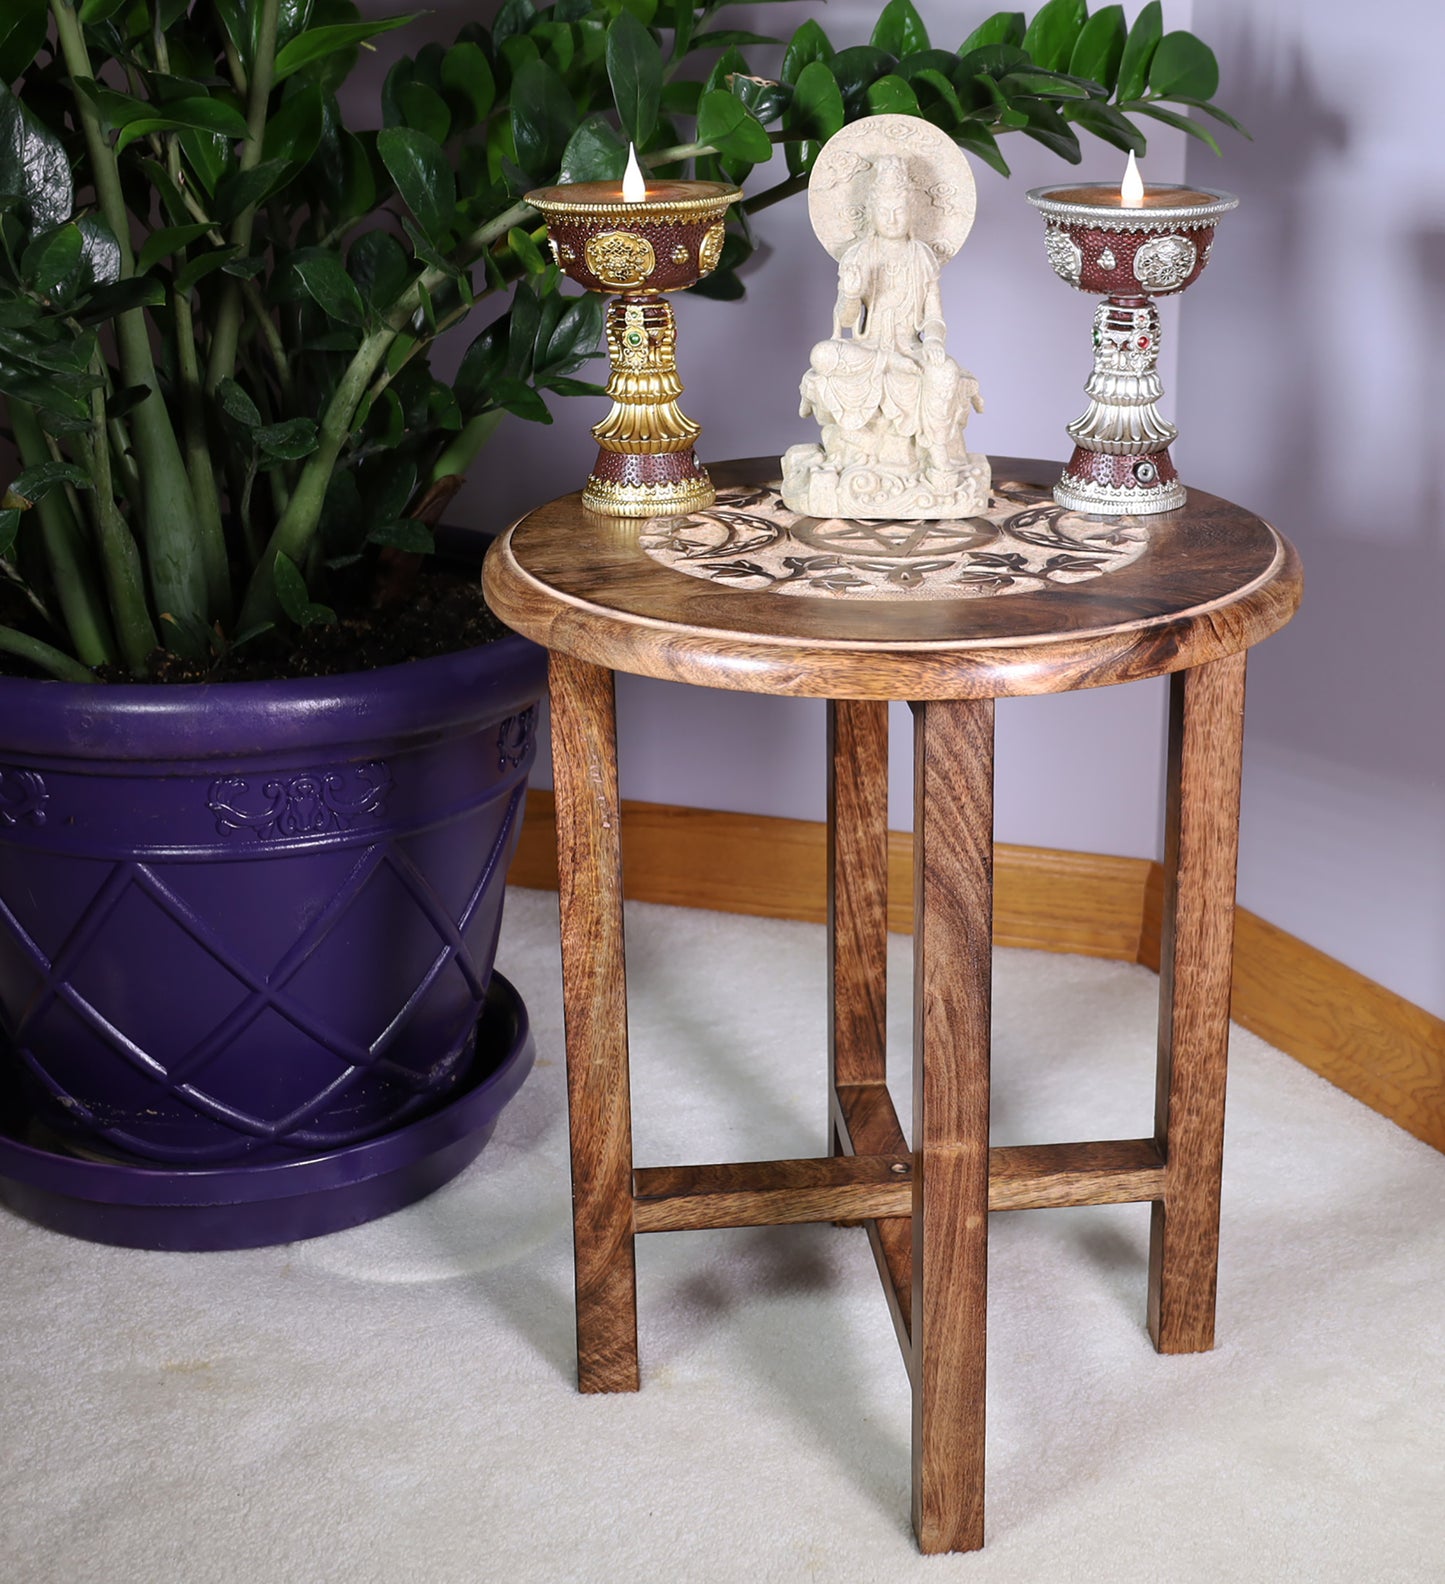 Hand Carved Wooden Round Meditation Table. Altar Table. Prayer Table. Puja. Shrine Table . Side or End Table 19 Inches High